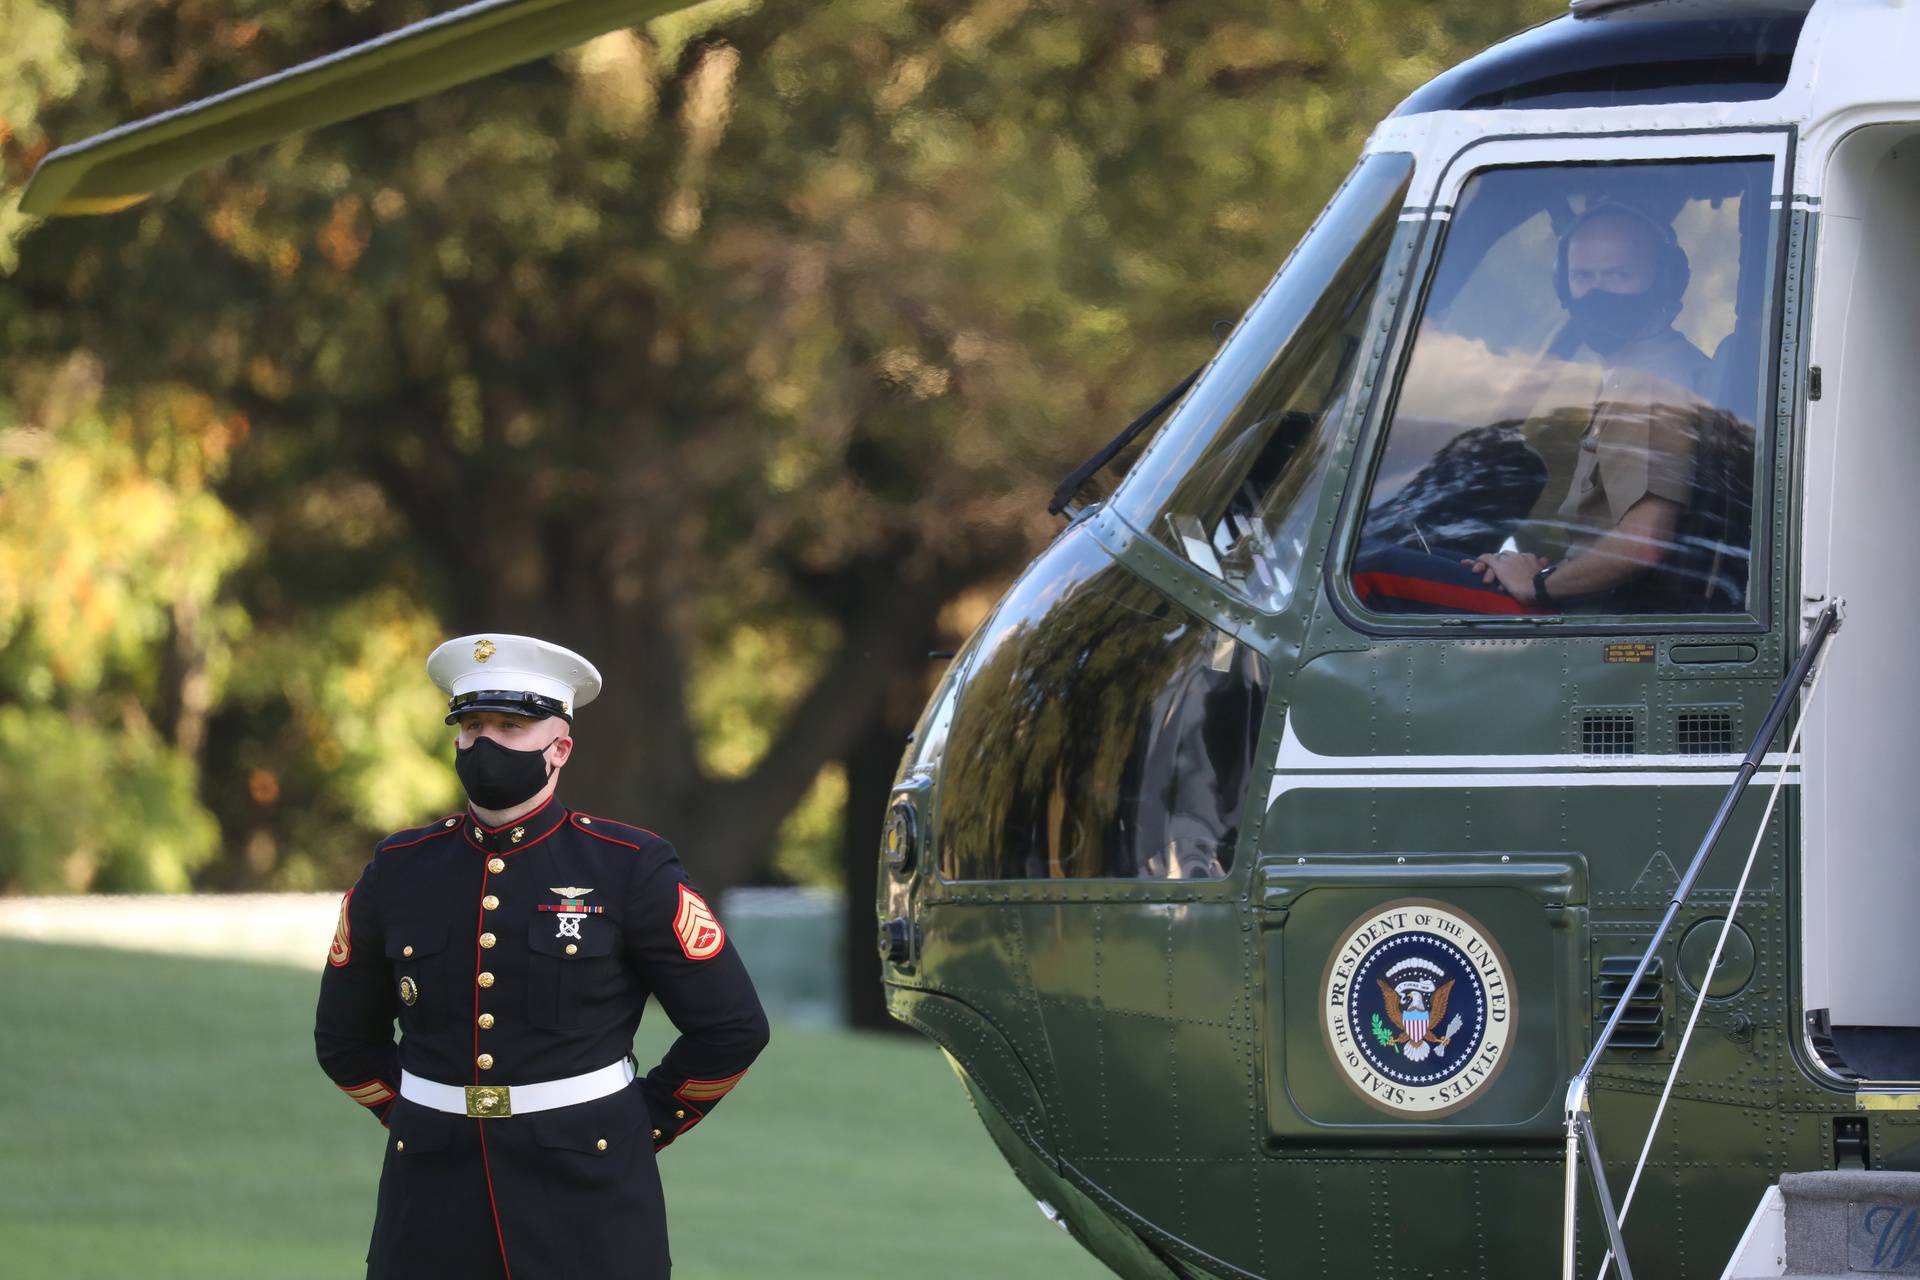 U.S. Marine waits by Marine One for U.S. President Trump to depart for Walter Reed Medical Center from the White House in Washington